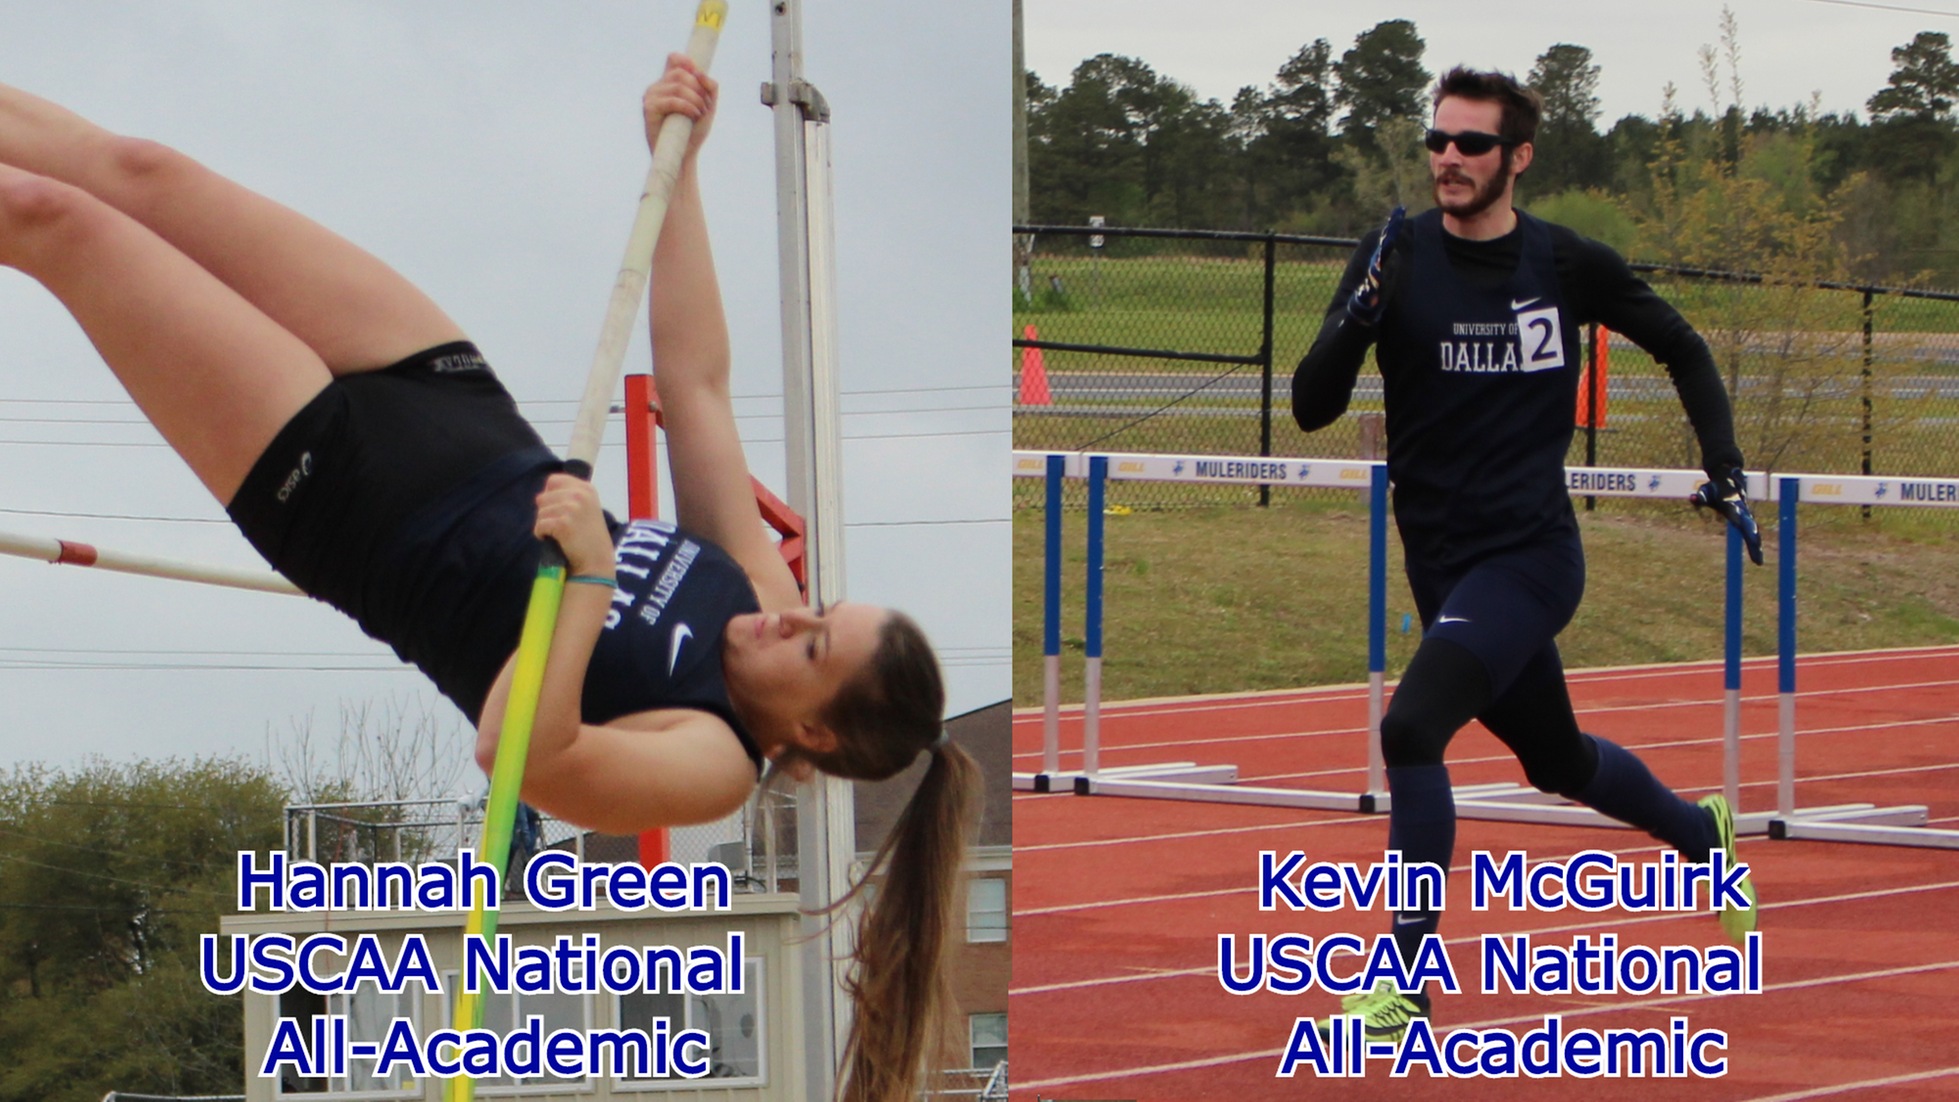 McGuirk and Green make 2020 USCAA Non-Championship Spring Sports National All-Academic Team